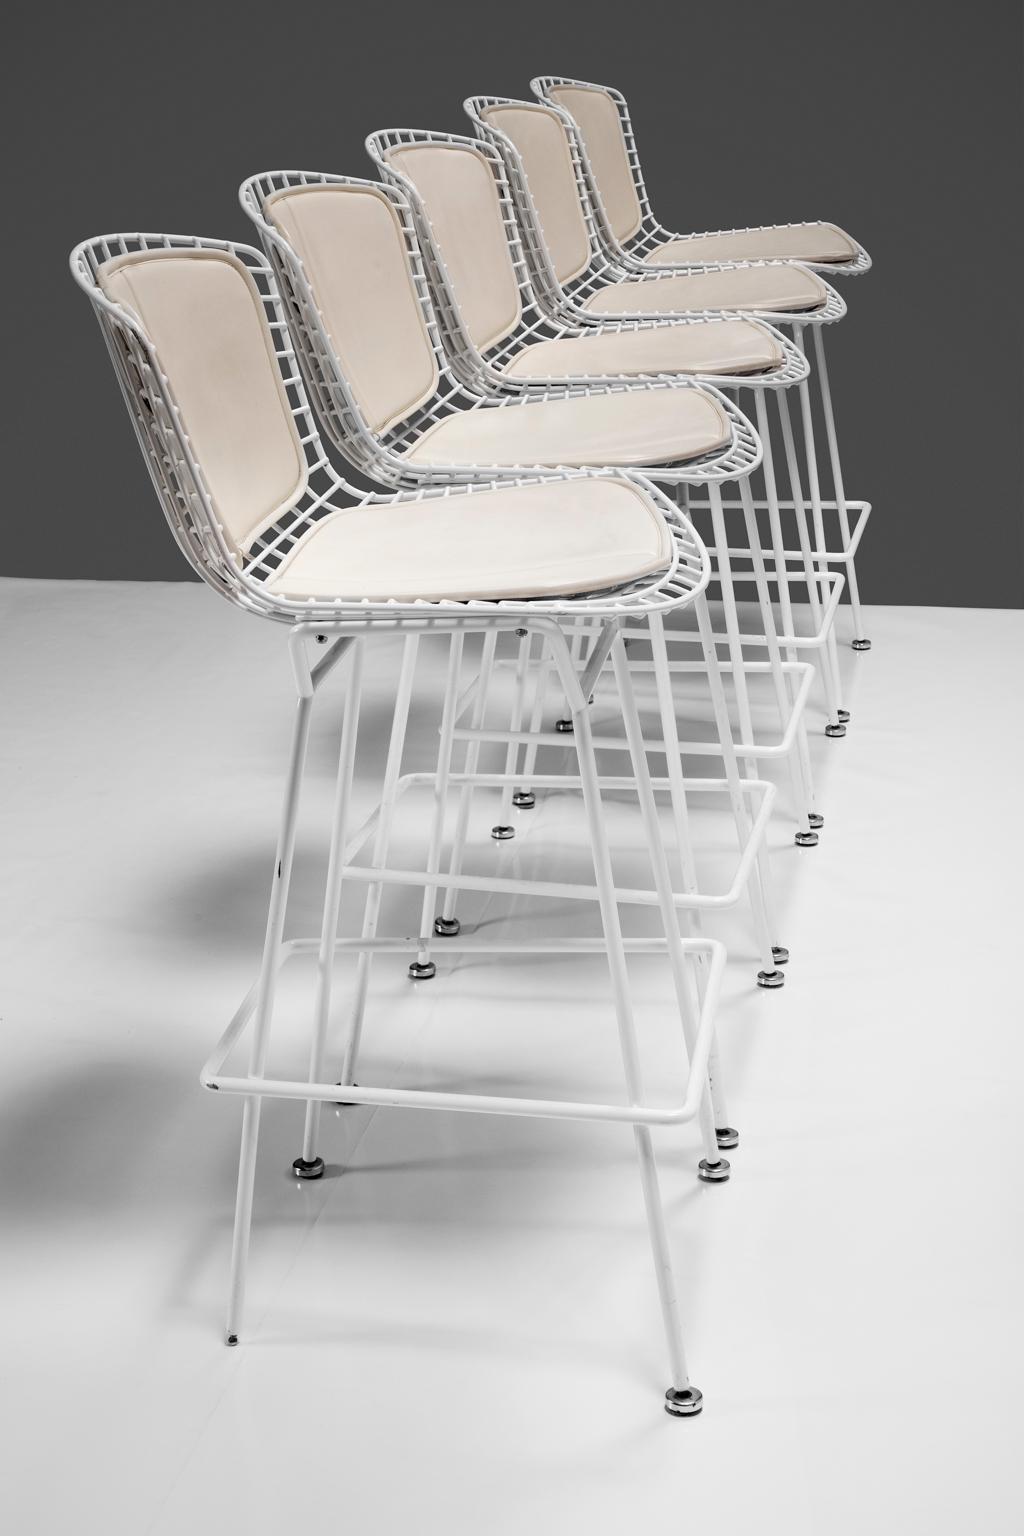 Harry Bertoia Counter Stool for Knoll White Powder Coated Steel with White Leather Cushions seats and backs. This set of five counter stools with both seat and back cushions in white leather are as elegant, strong & functional as when they were